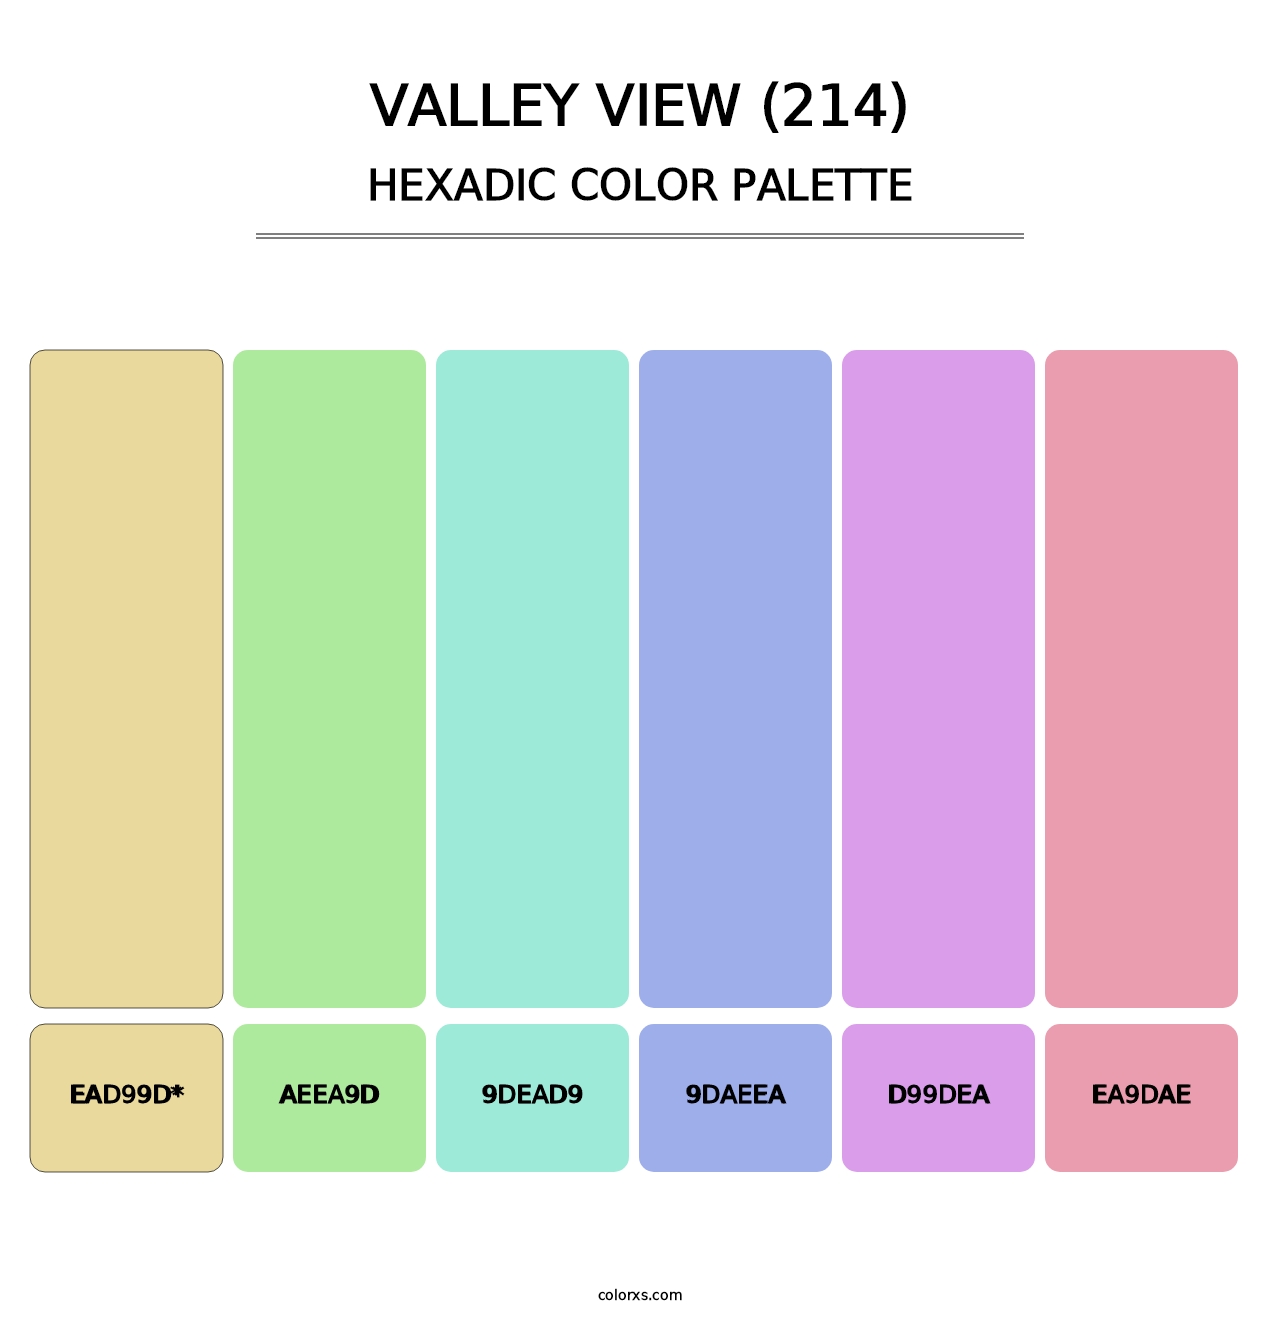 Valley View (214) - Hexadic Color Palette